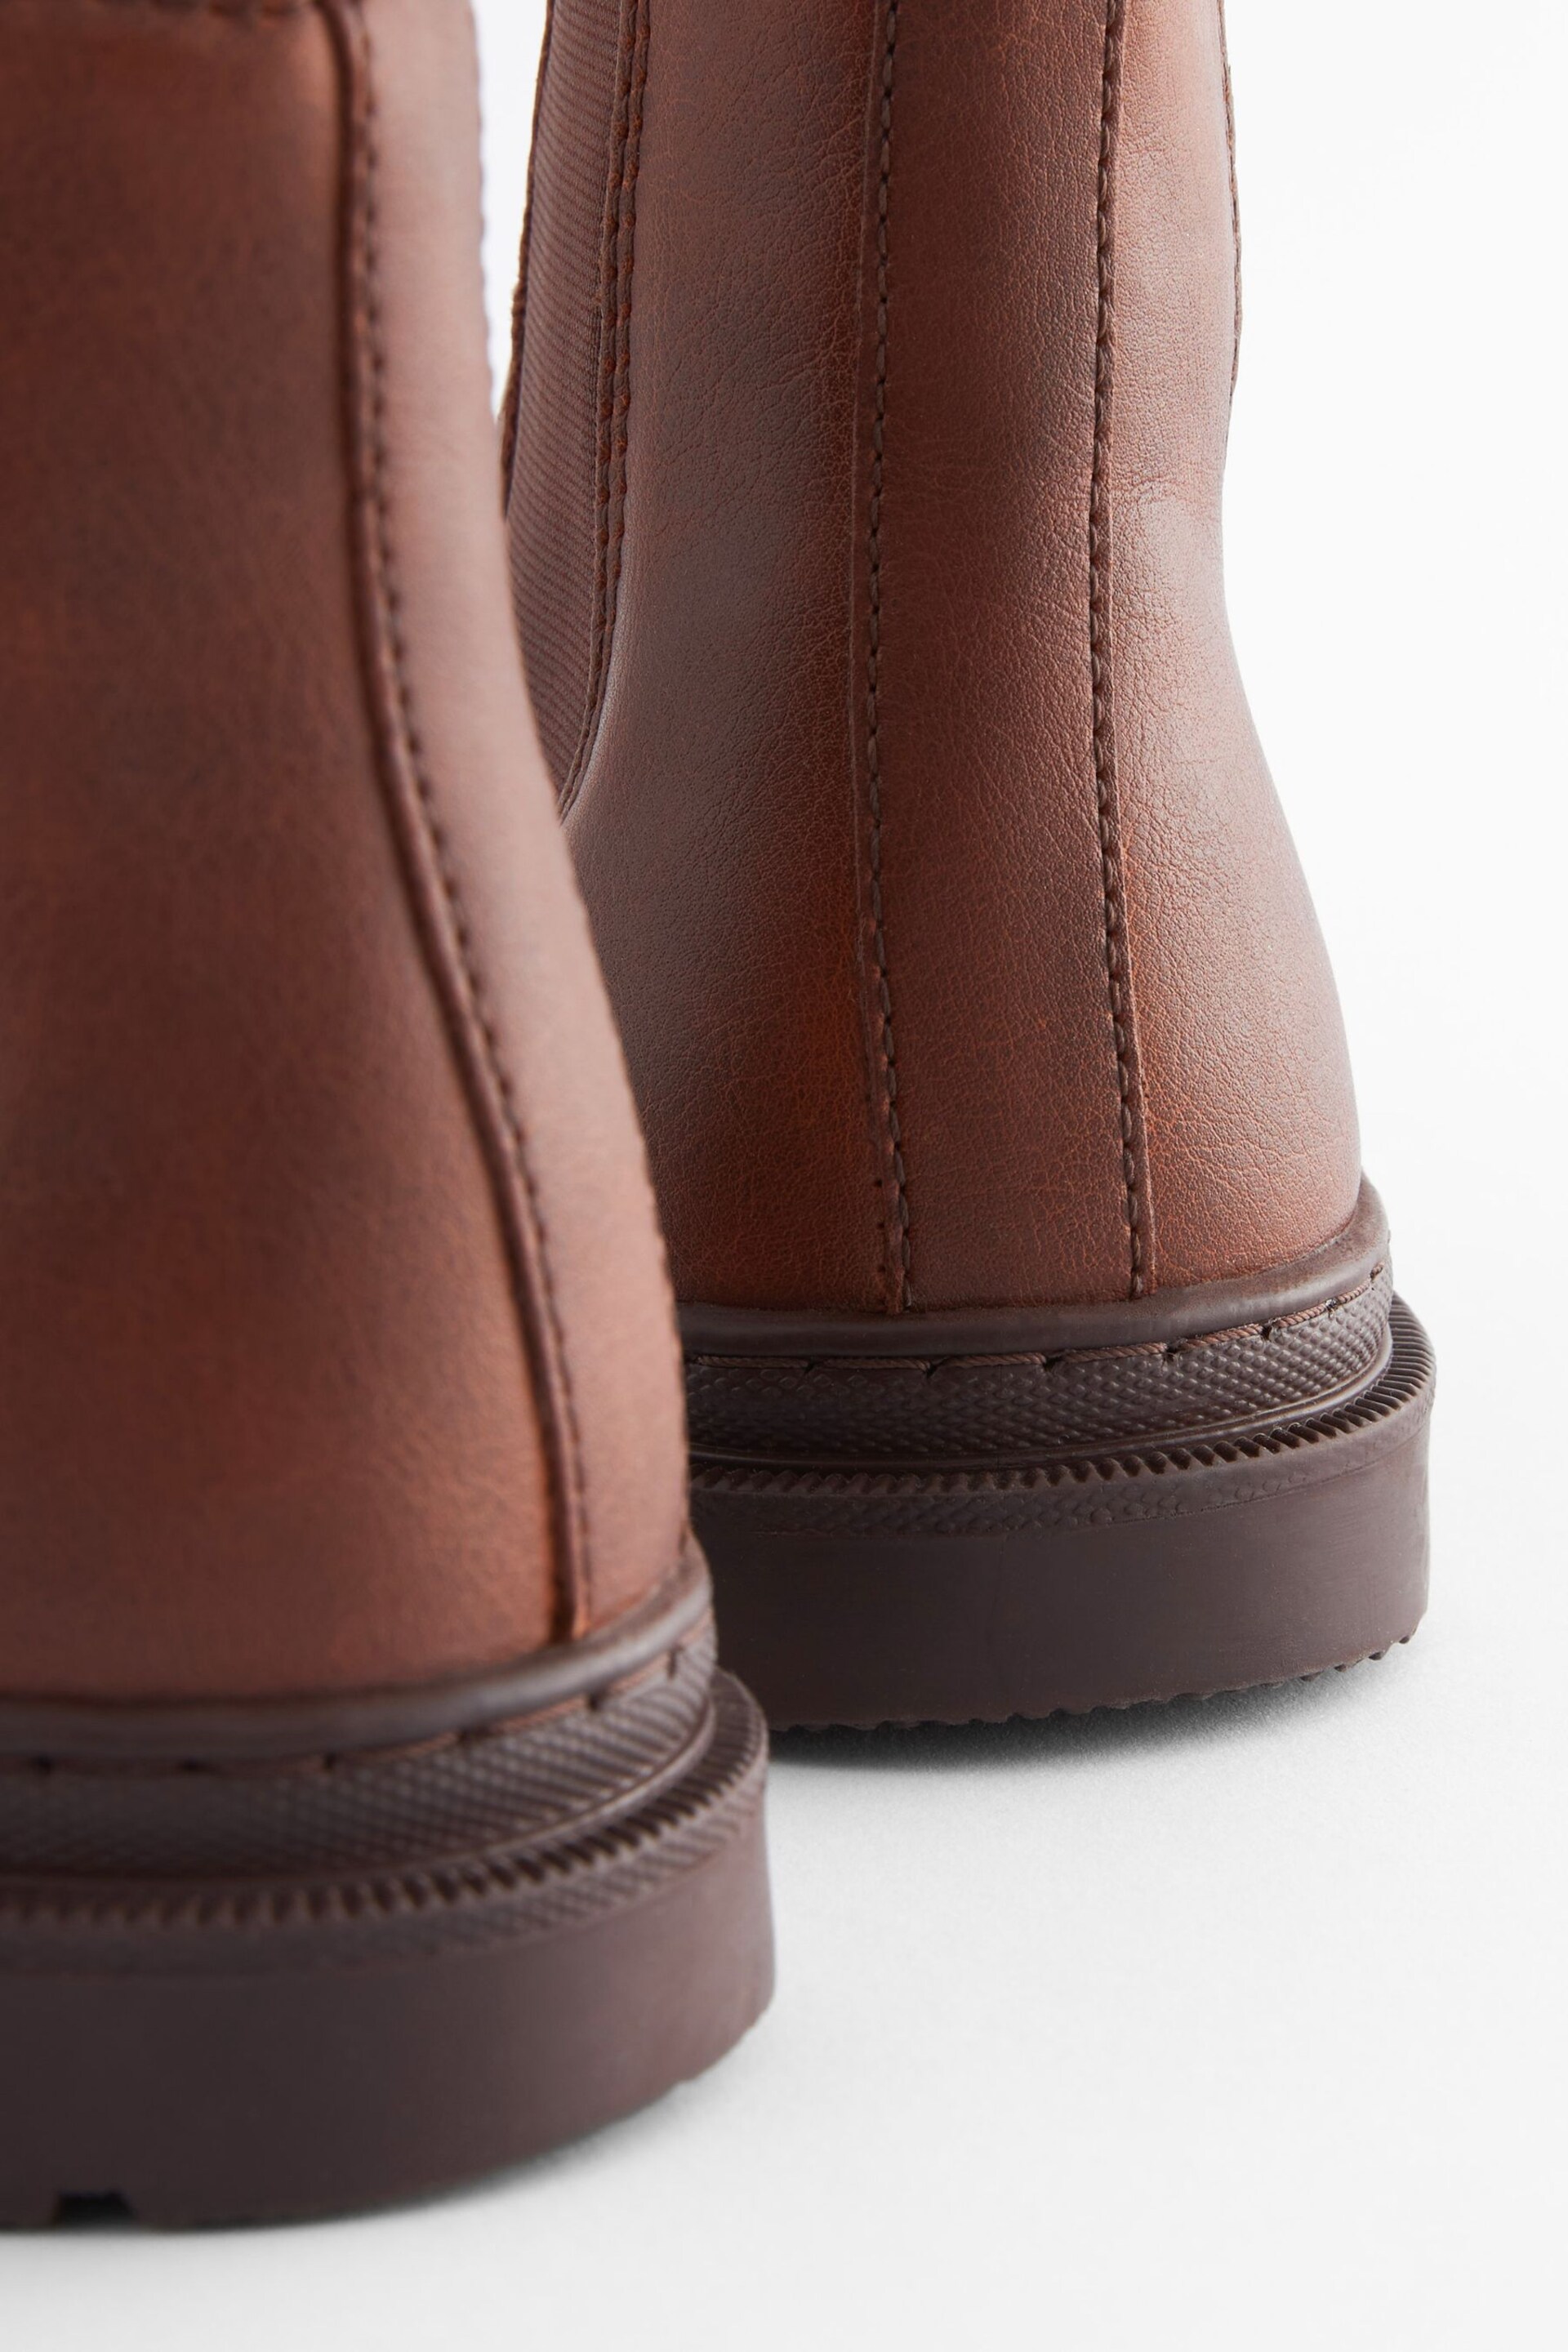 Chocolate Brown Chelsea Boots - Image 3 of 5